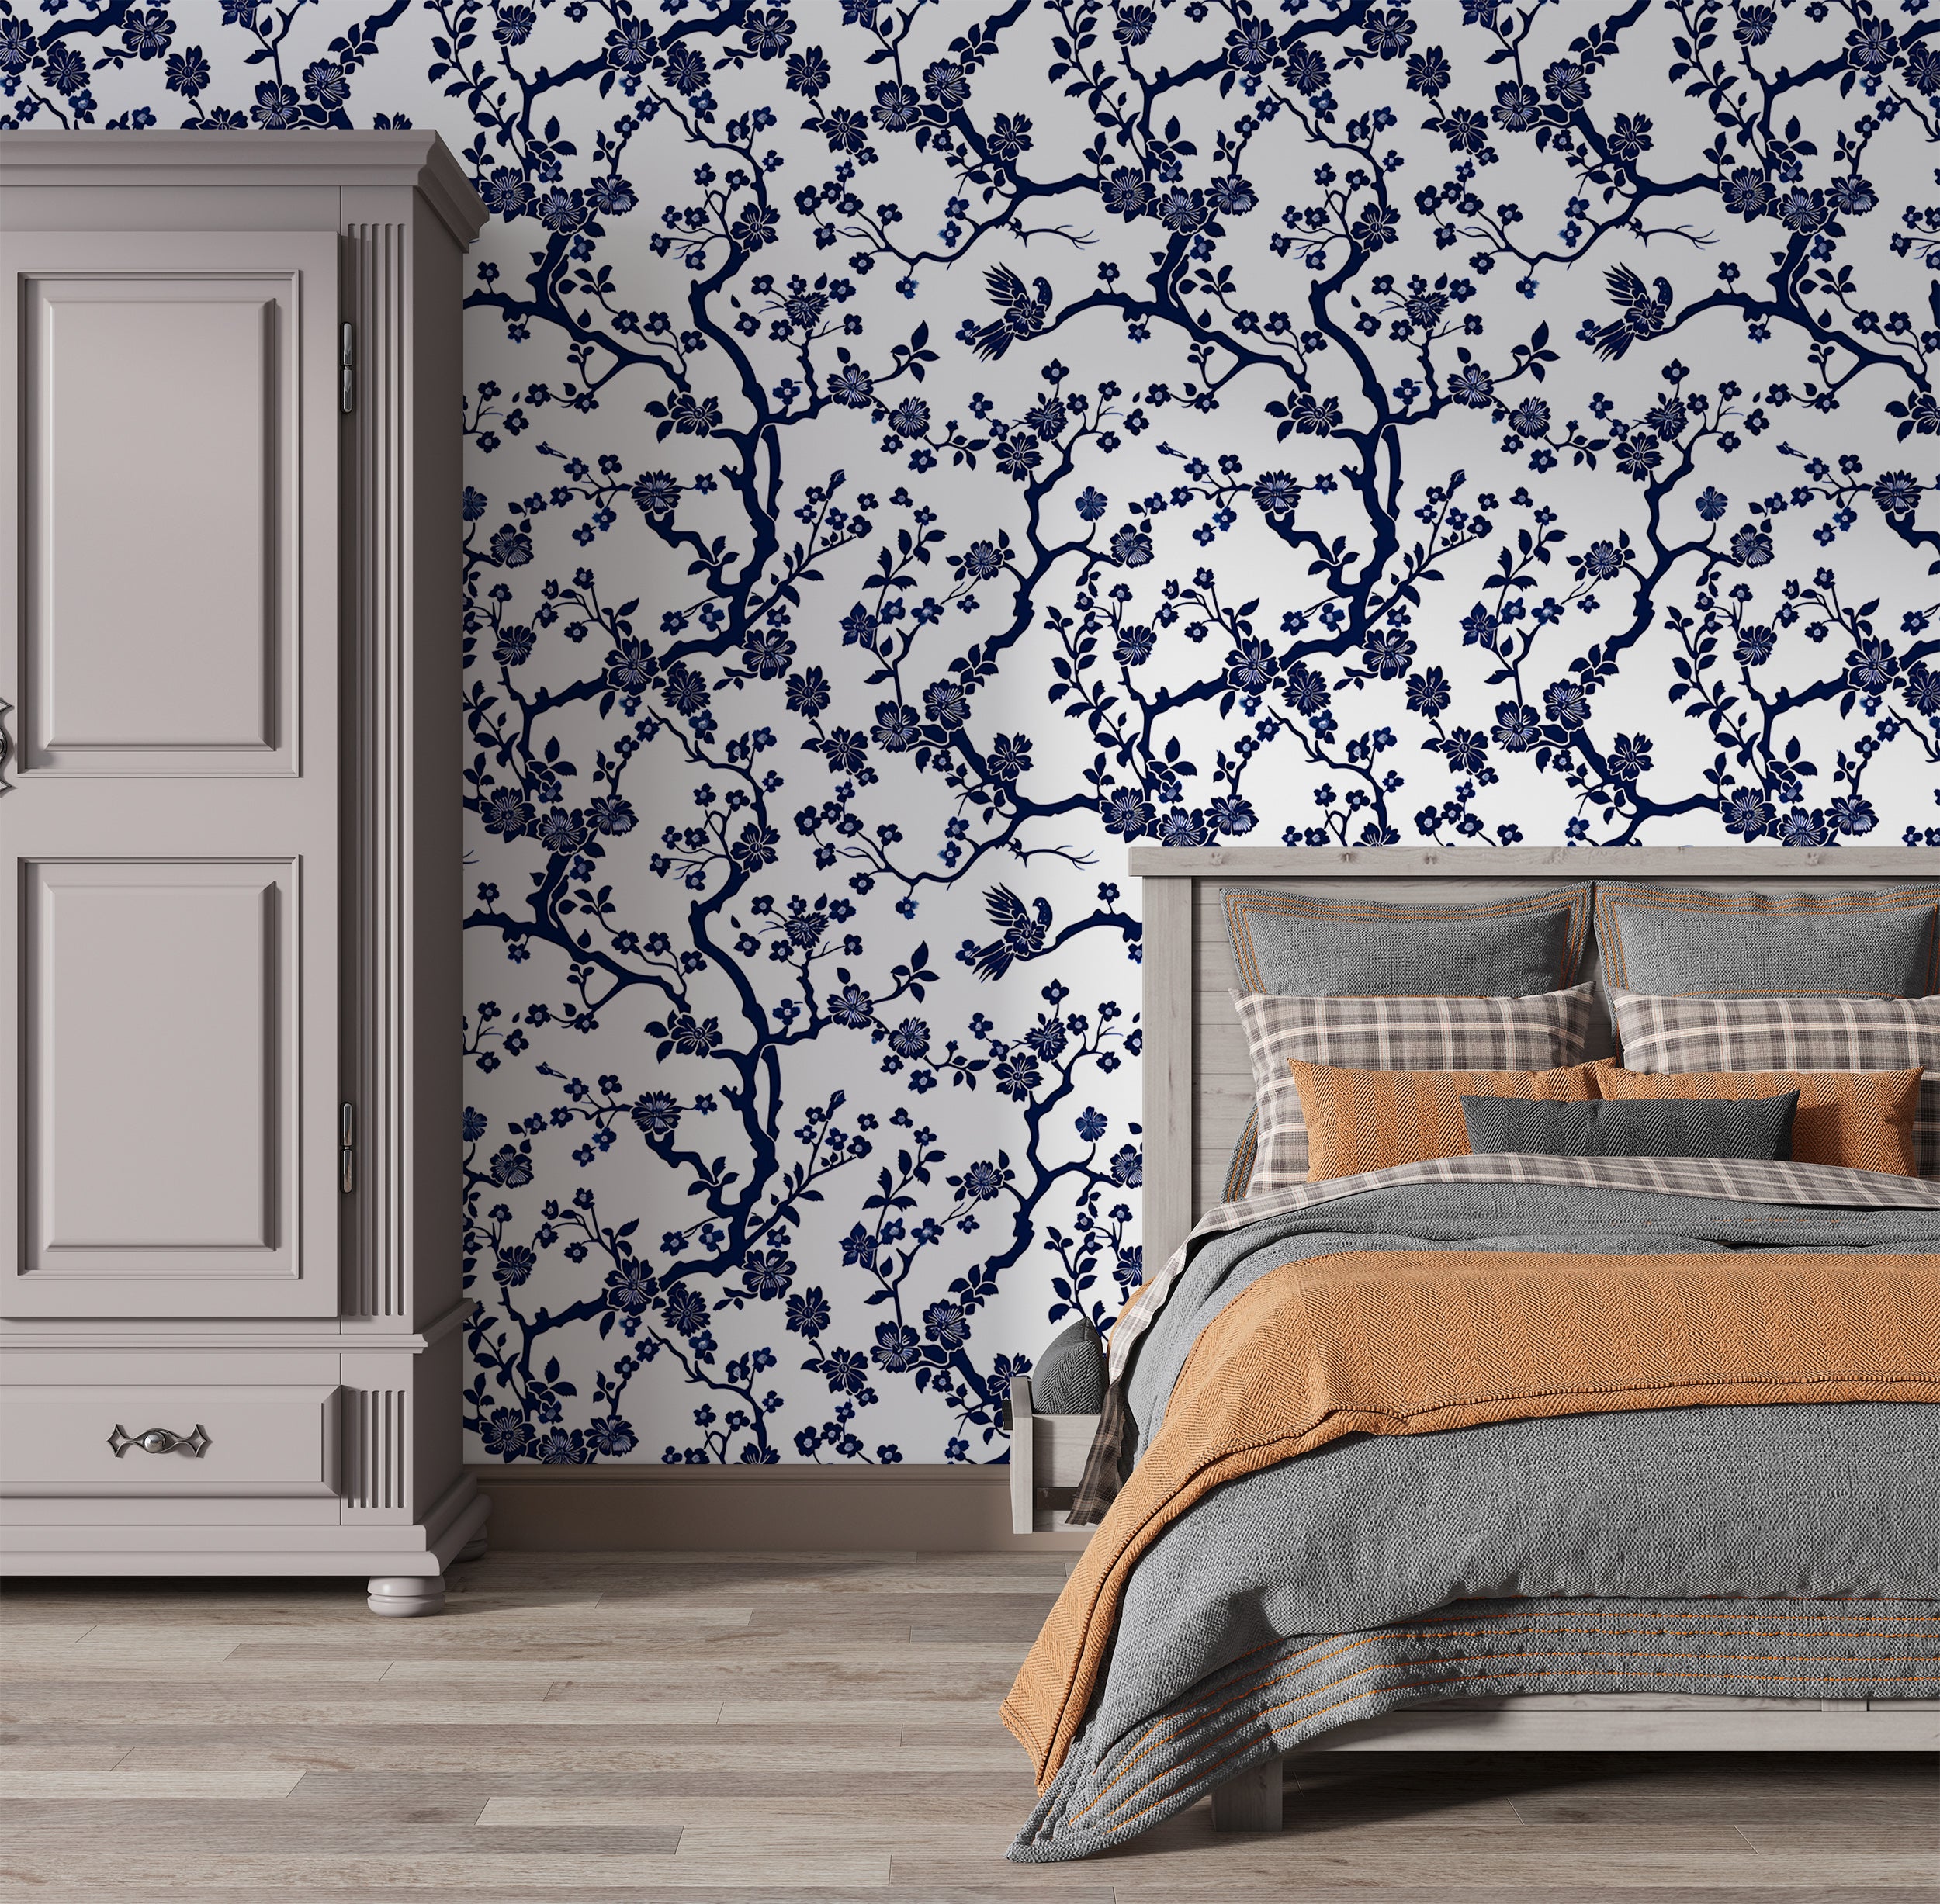 Blue and White Floral Wallpaper, Peel and Stick French Style Botanical Decor, Small Flowers and Branches Wallpaper, Removable Blue Floral